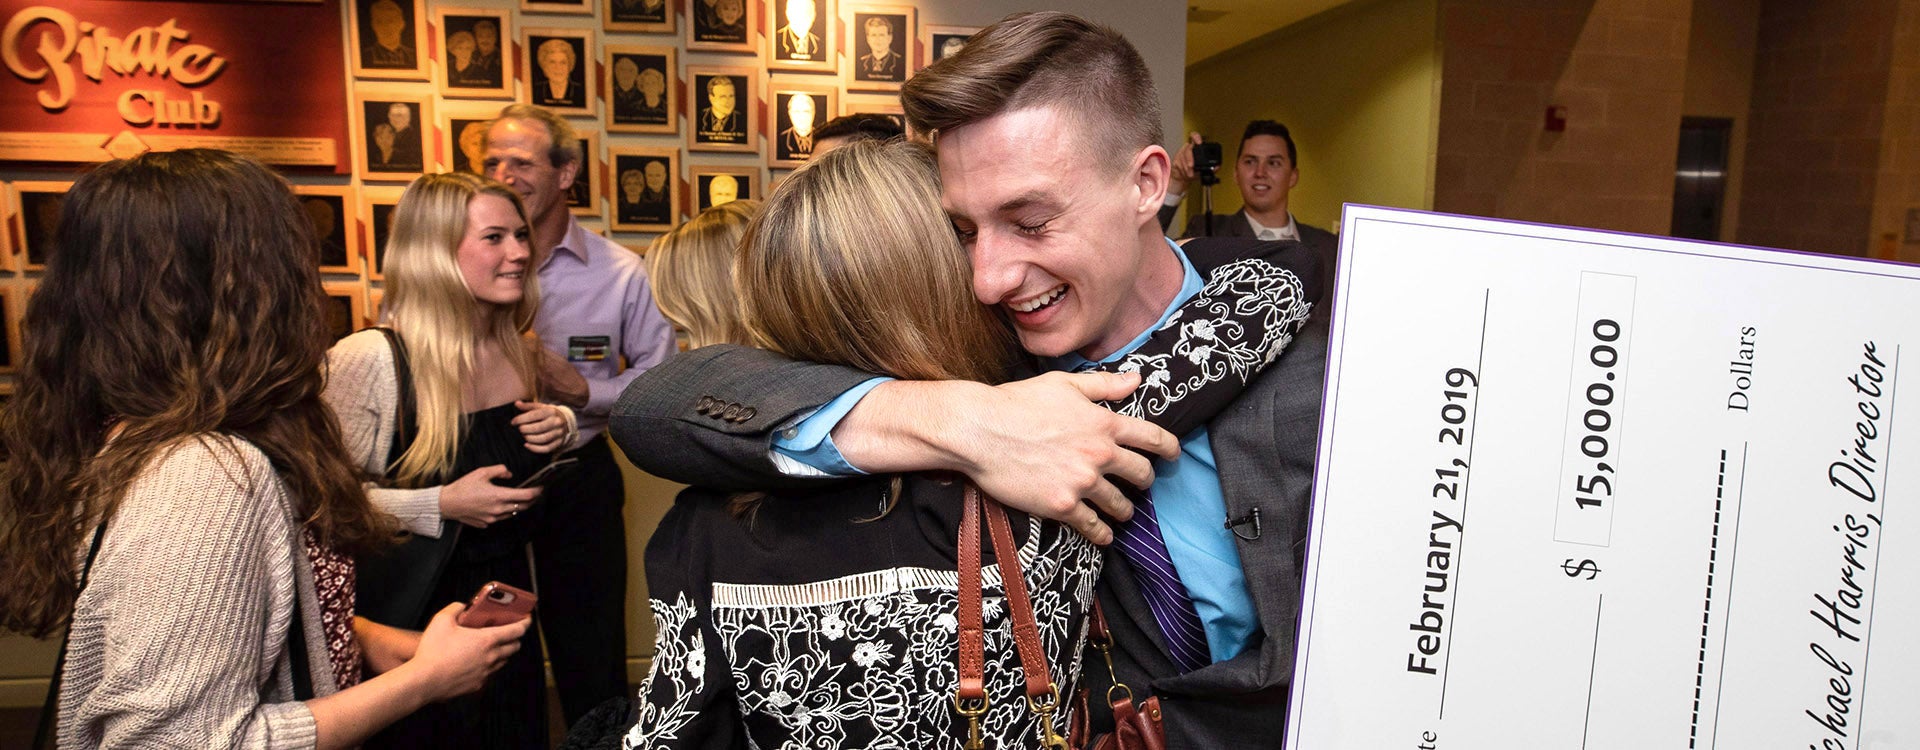 Steven Lipscomb shares a hug with his mother after winning the Pirate Entrepreneurship Challenge for an app he developed with co-founder Camden Bathras.